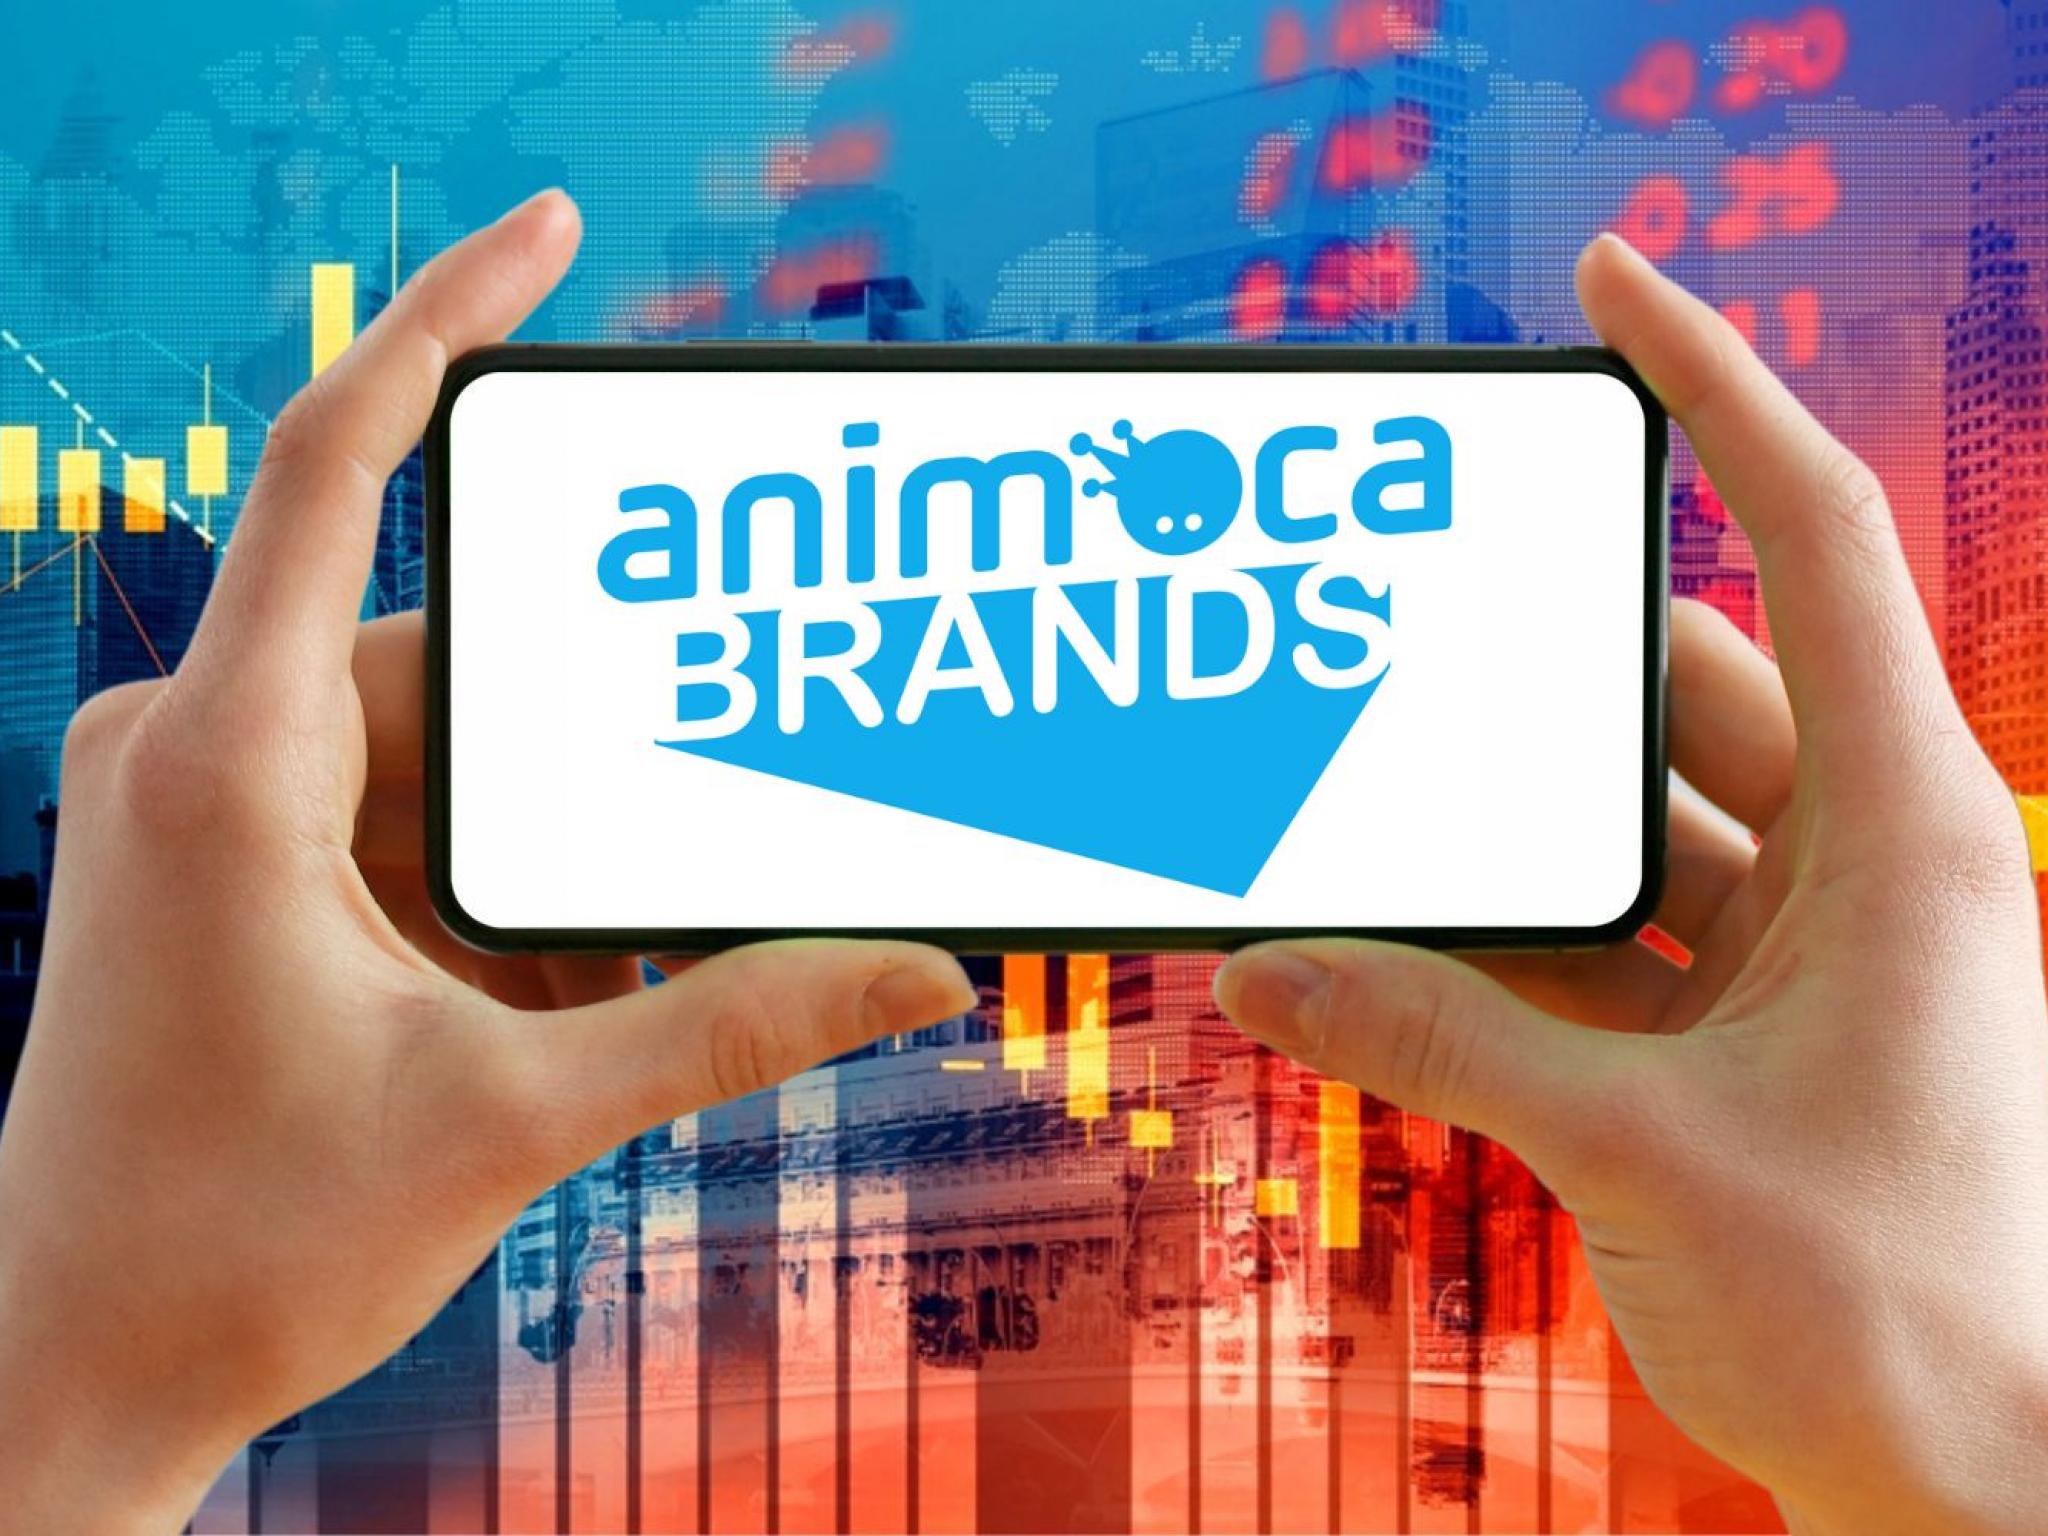  animoca-brands-wallets-bursting-with-cash-stablecoins-and-crypto-a-web3-juggernaut-in-the-making 